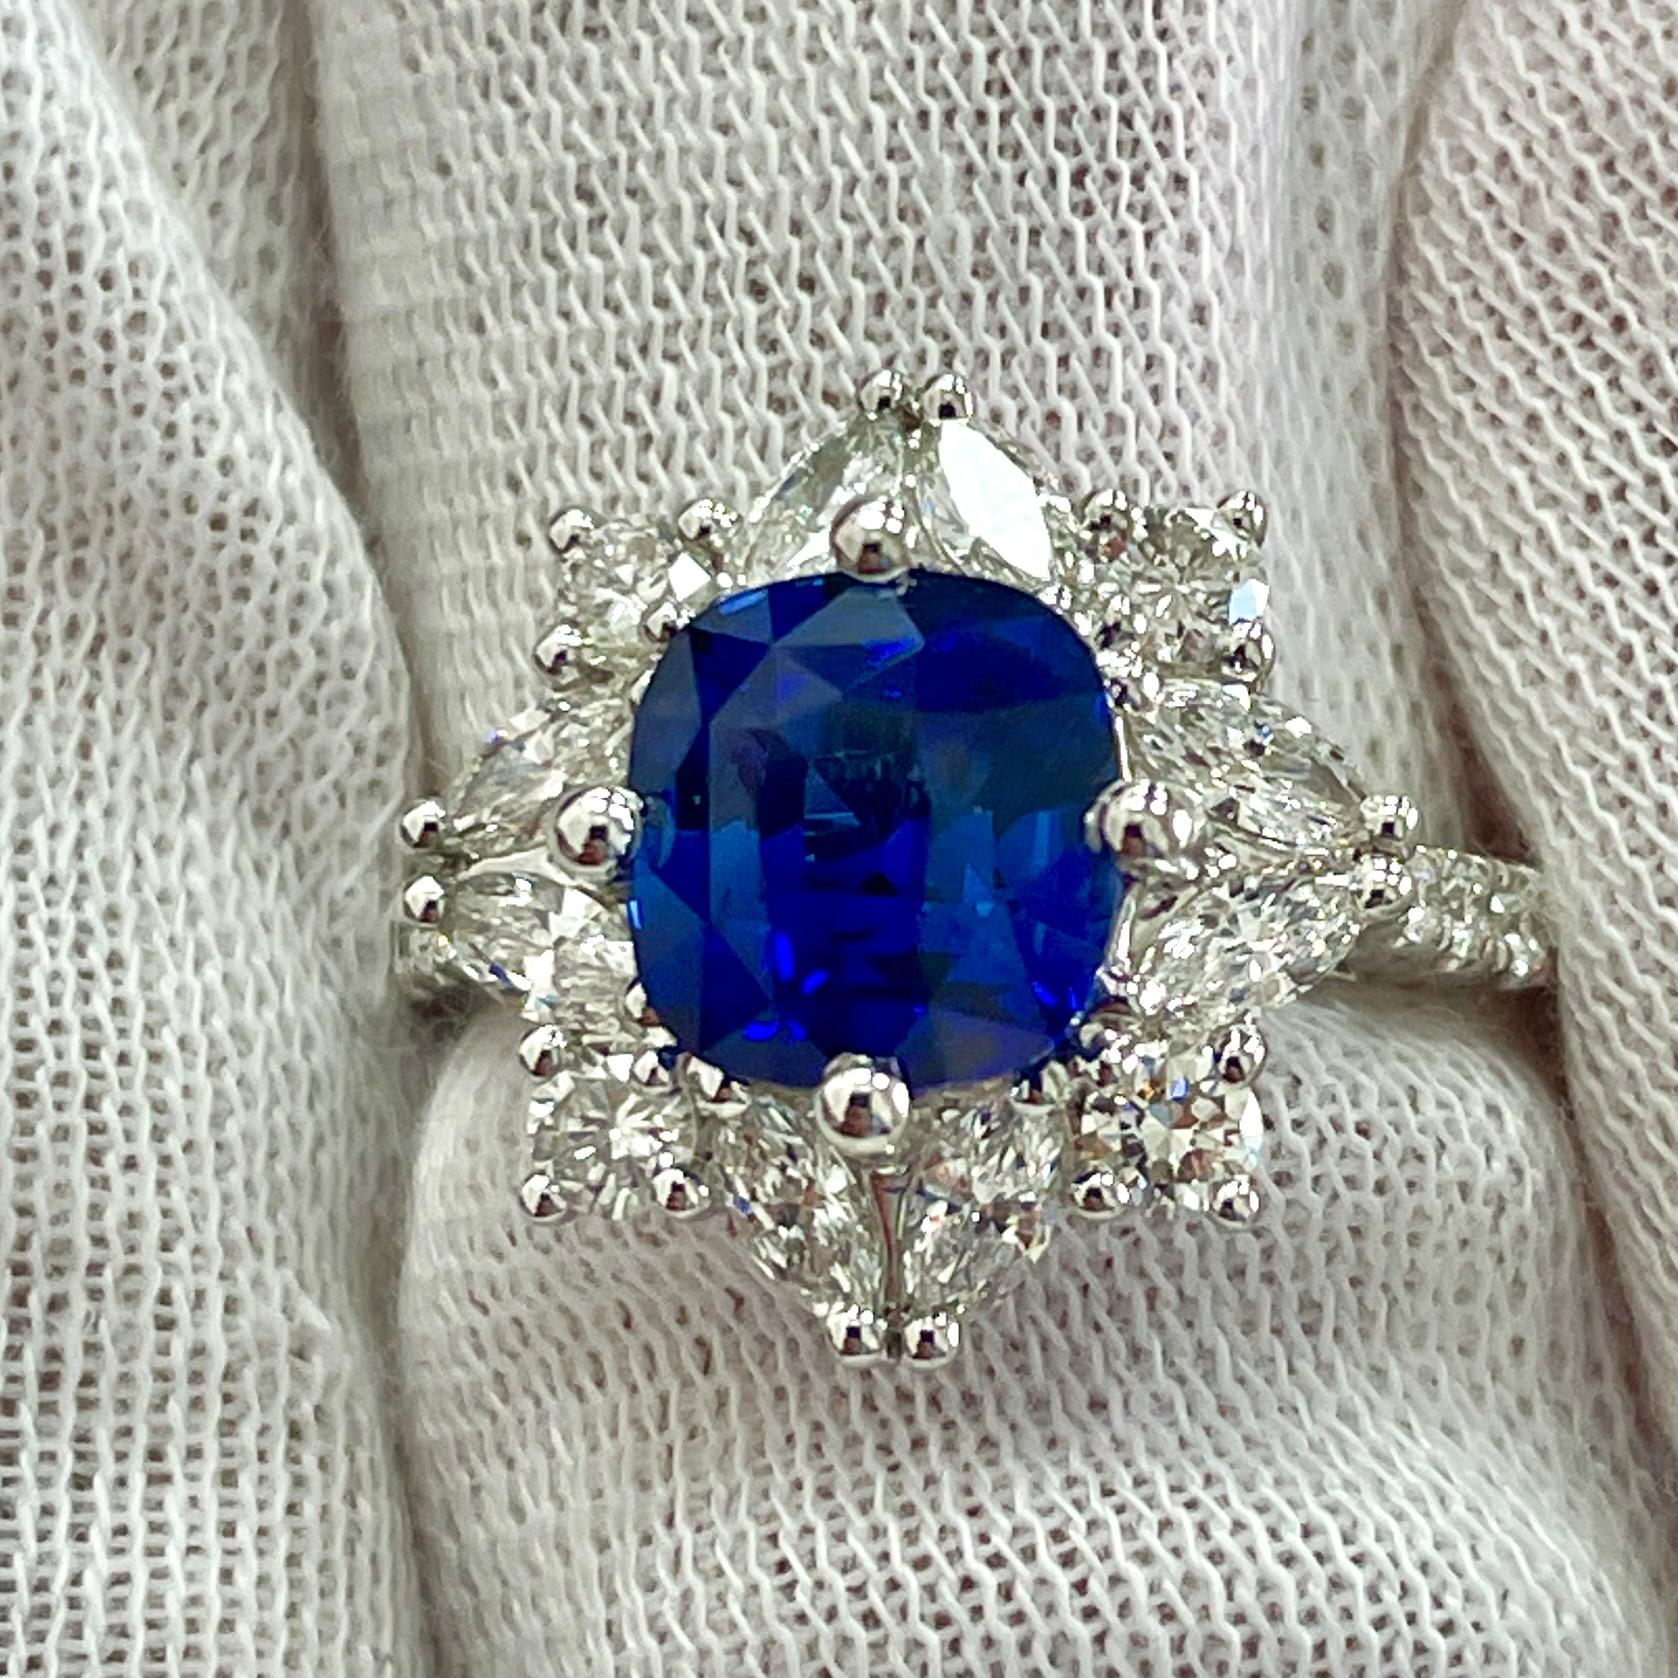 This is a vivid blue cushion cut sapphire mounted in an elegant 18K white gold ring with .99Ct of brilliant white diamonds. Suitable for any occasion!